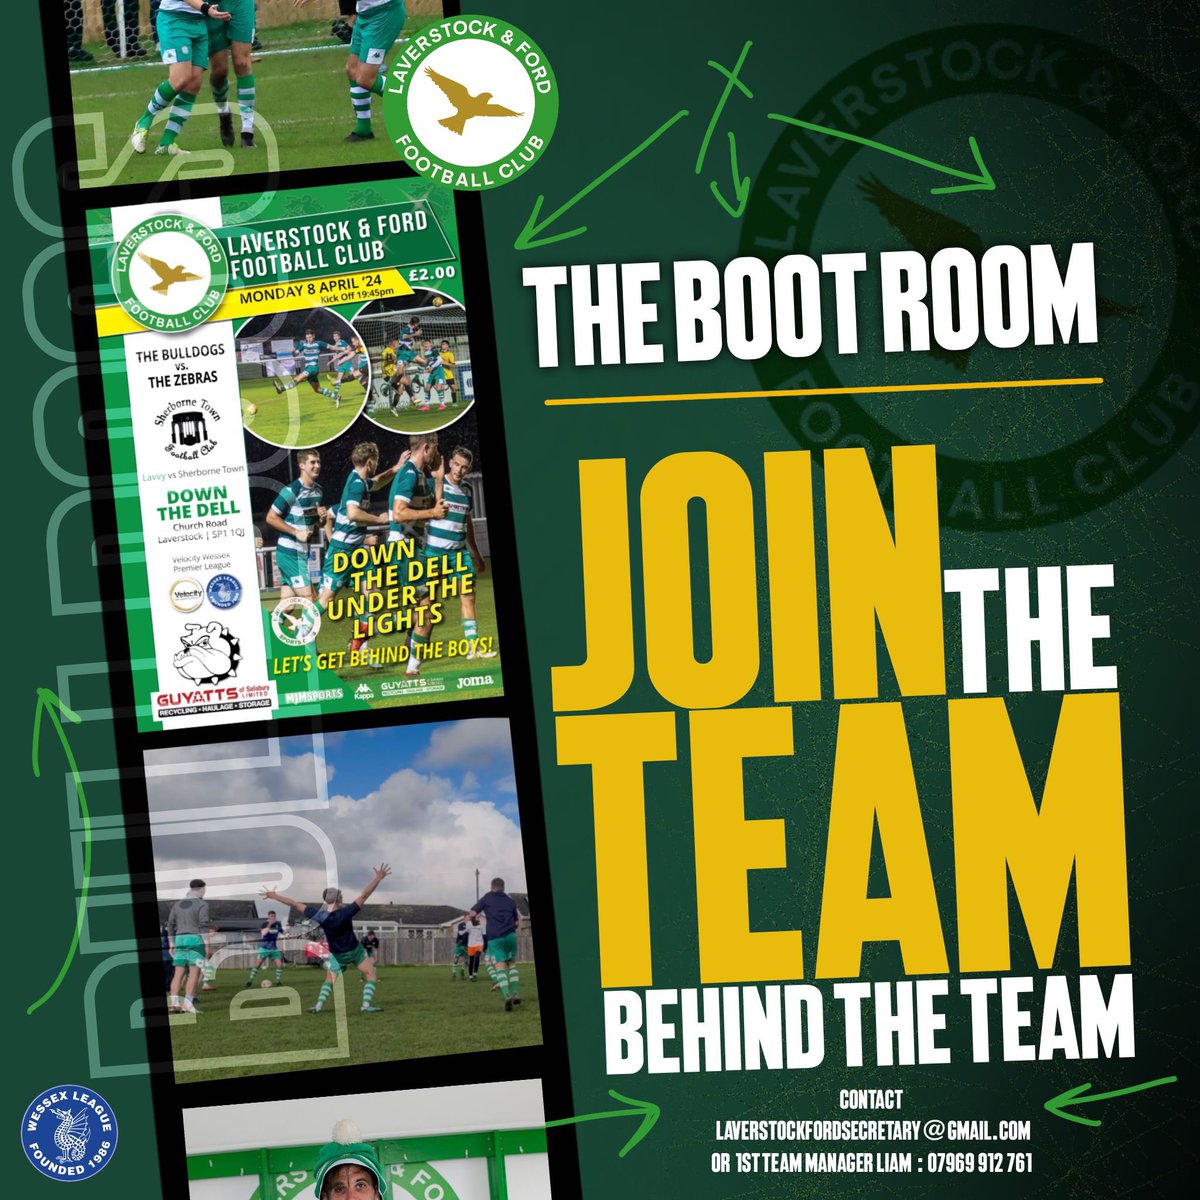 Good morning you lovely lot 👋🏽 ☀️ As the off season continues & preparation builds for 24/25, We are looking to add to our already impressive Bootroom. So if anyone is keen to be part of the Bulldogs for next season get in touch 👍🏽 #Bulldogs💚⚽️🐶